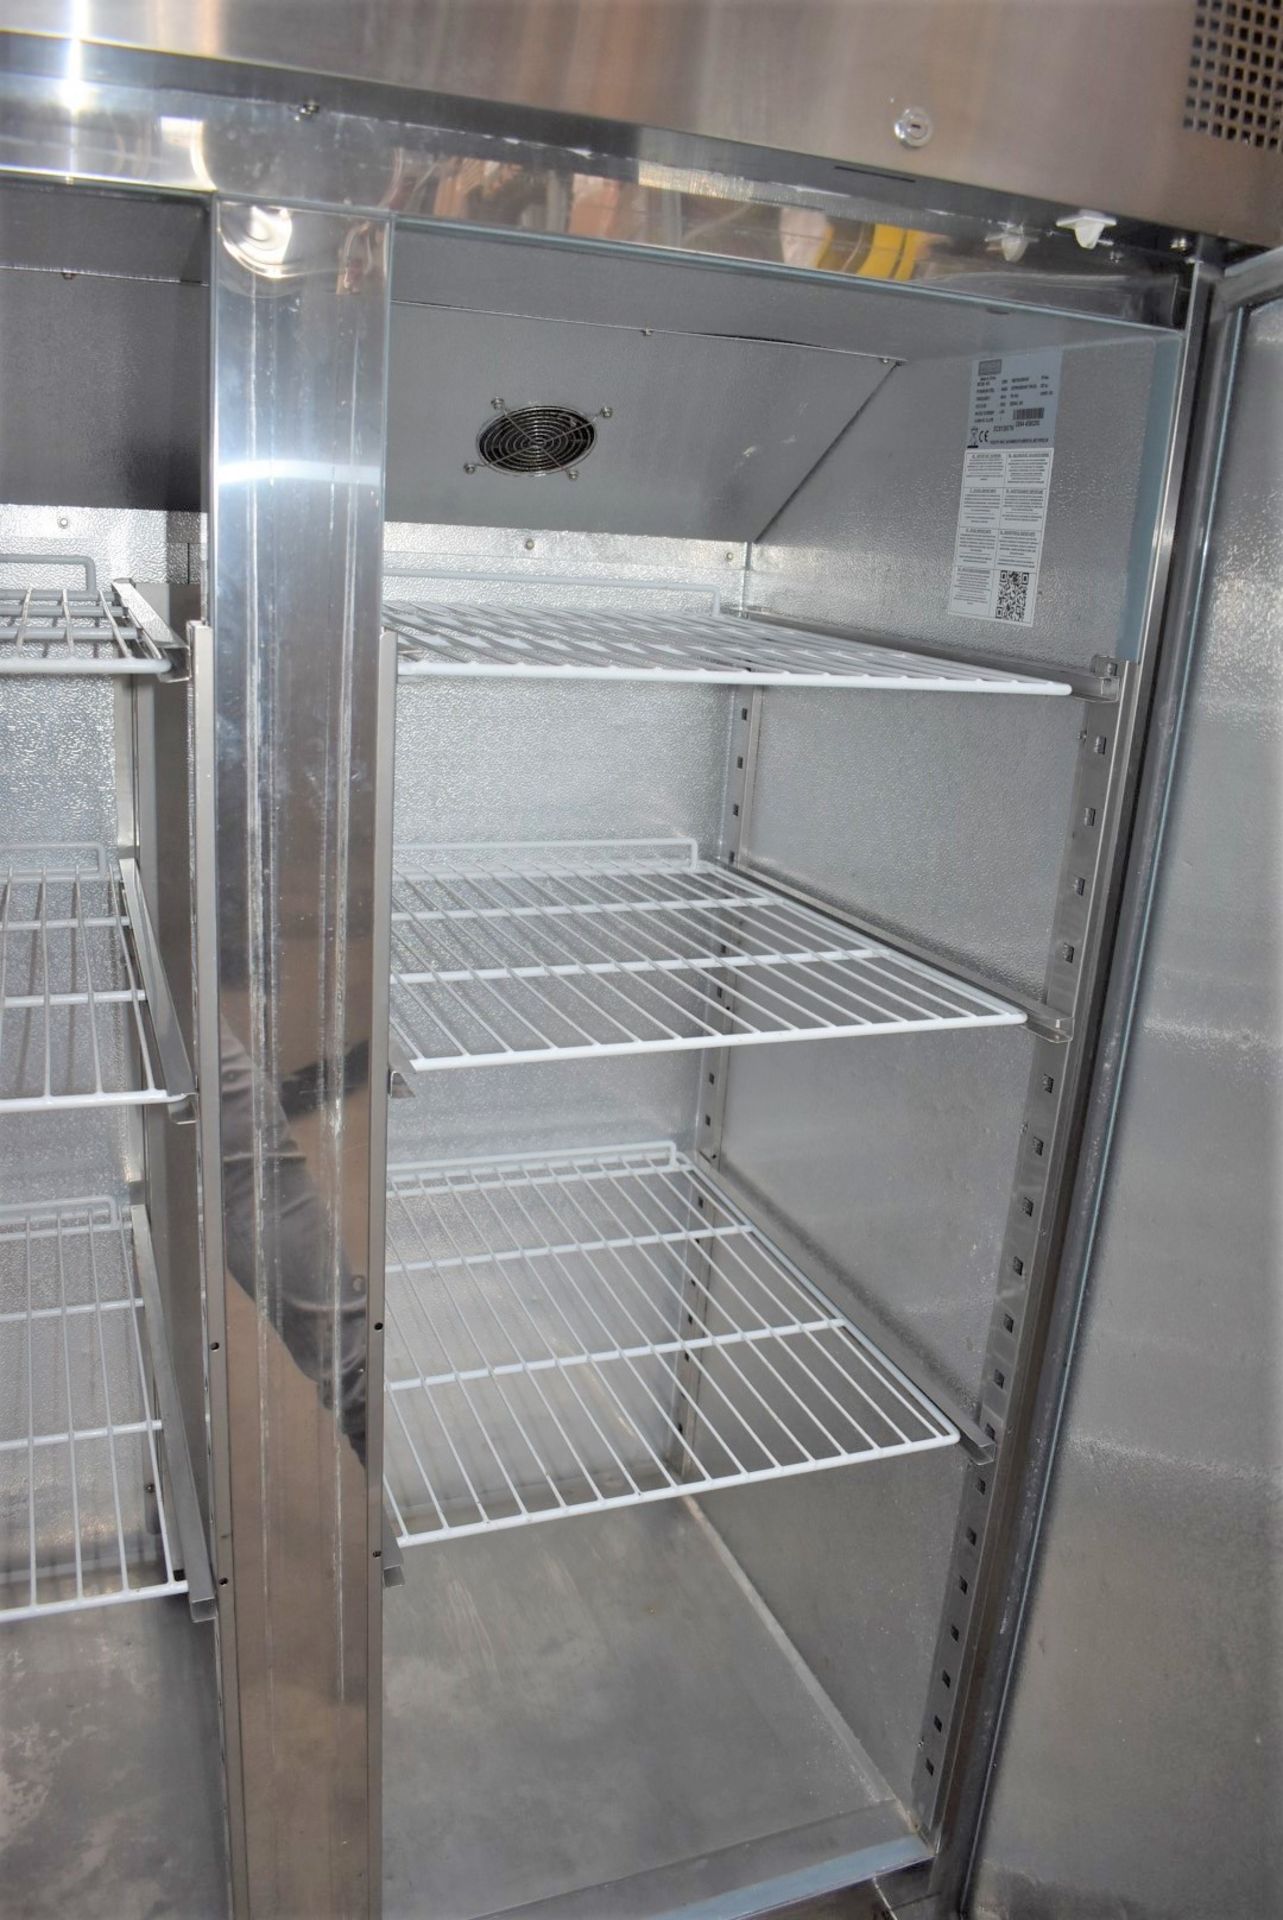 1 x Polar G Series Upright Double Door Refrigerator - Model G594 - Complete With Internal - Image 18 of 18